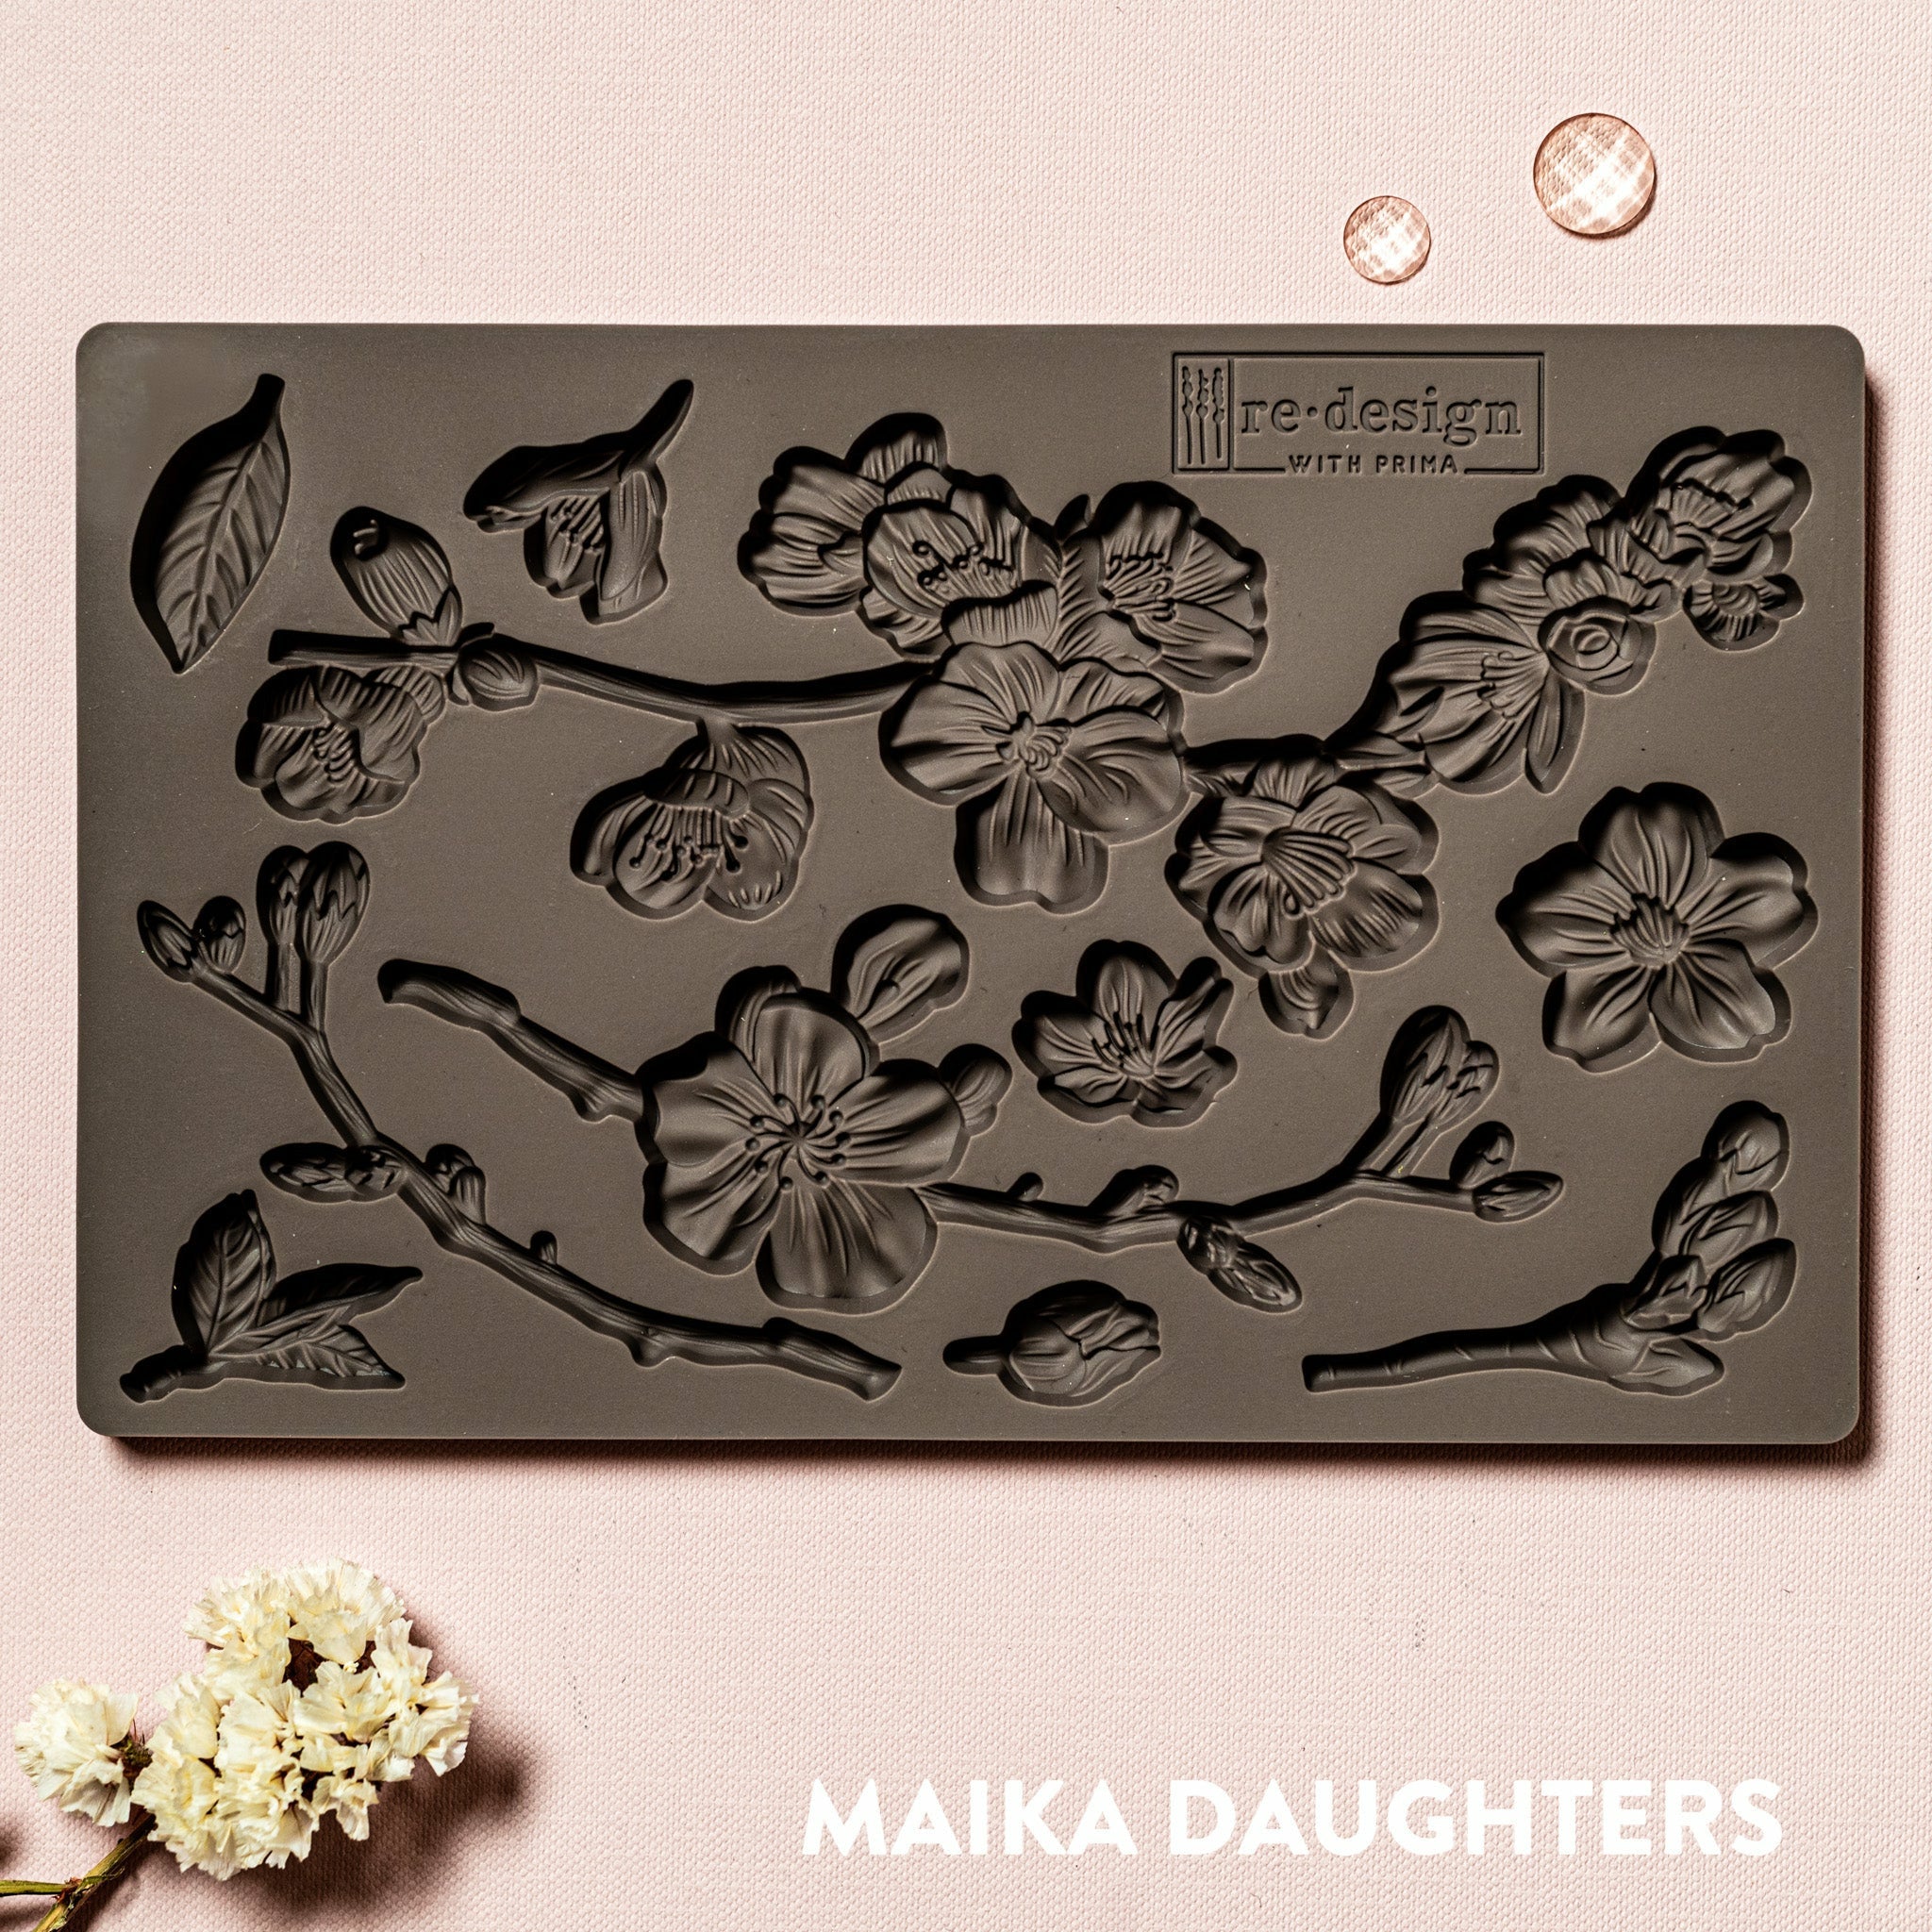 A brown silicone mould of ReDesign with Prima's Cherry Blossoms is against a light pink background.